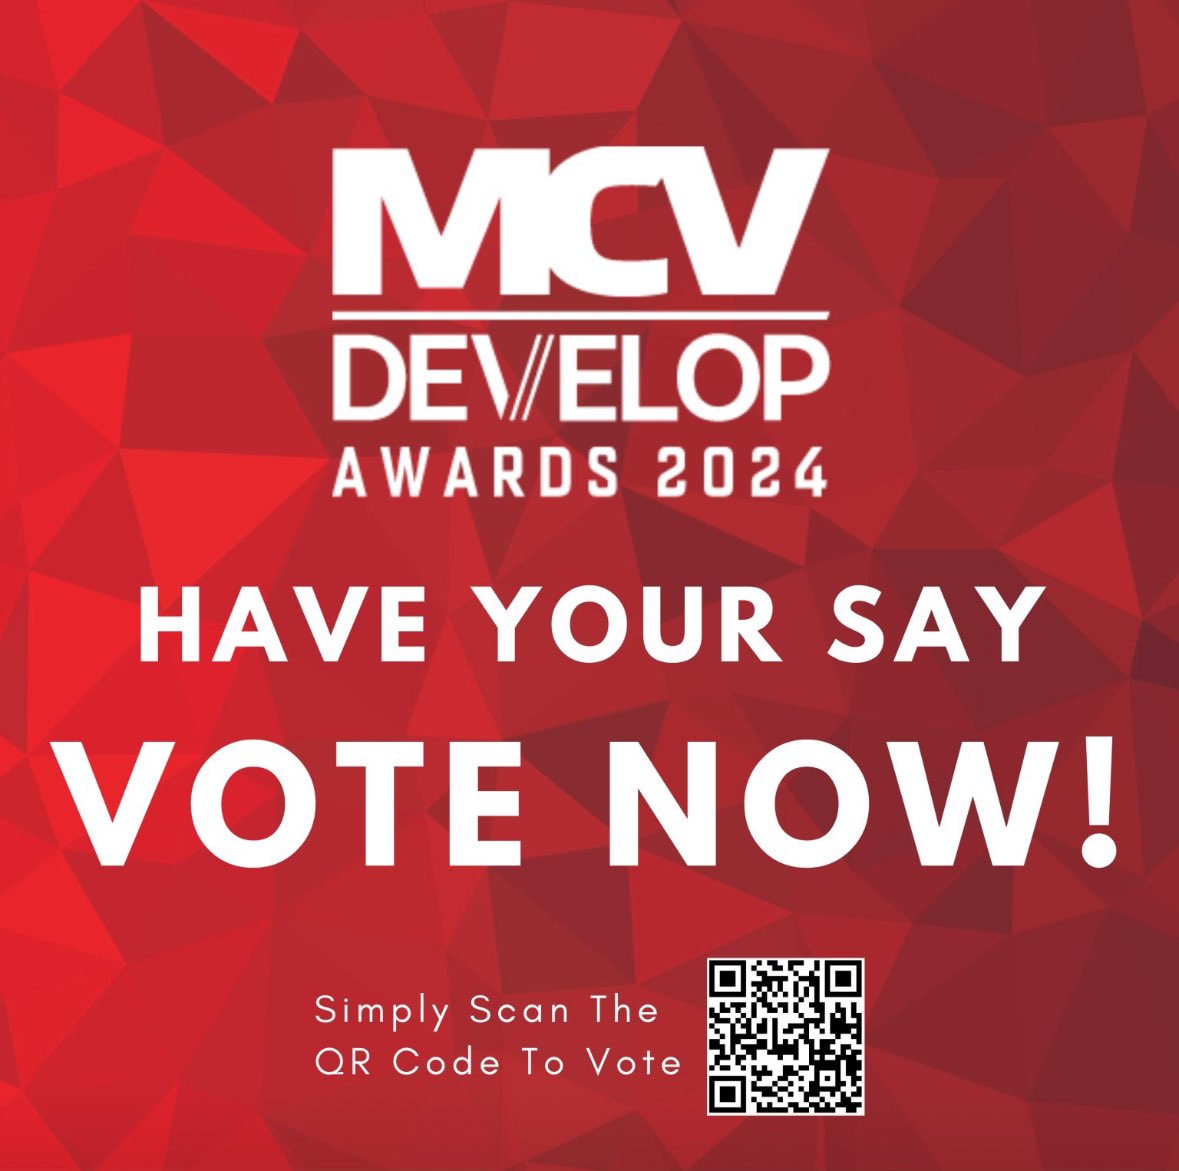 We are humbled and happy to be shortlisted for @MCV_DEVELOP awards! Please would you give support and vote for us, also @RpdEyeMovers @4mediagroupUK 🧡